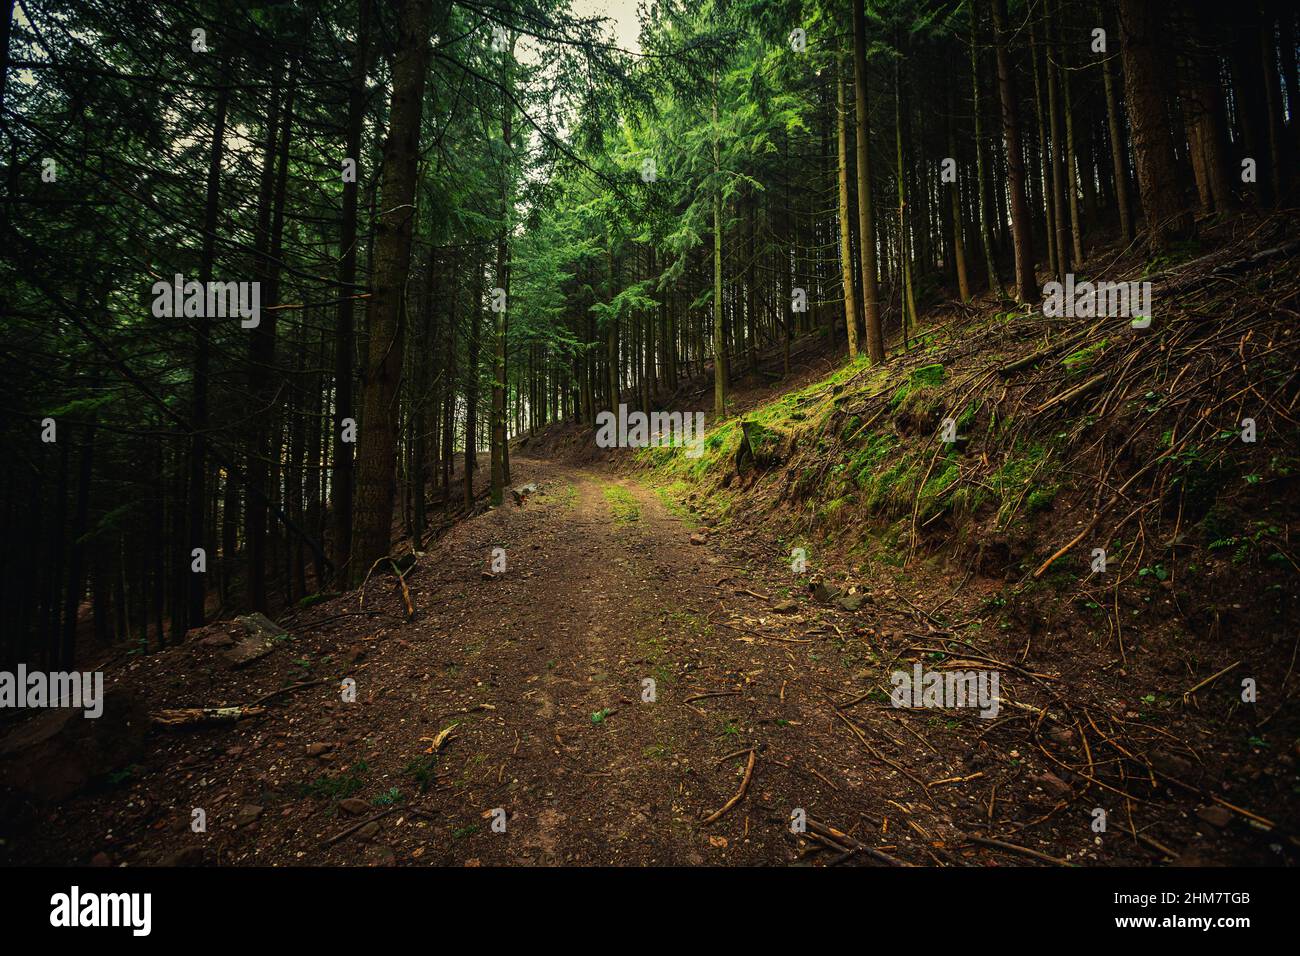 Hiking Trail in the forest. Hiking path  in  forest on a bright sunny day with tall pine trees, grass and moss. Stock Photo